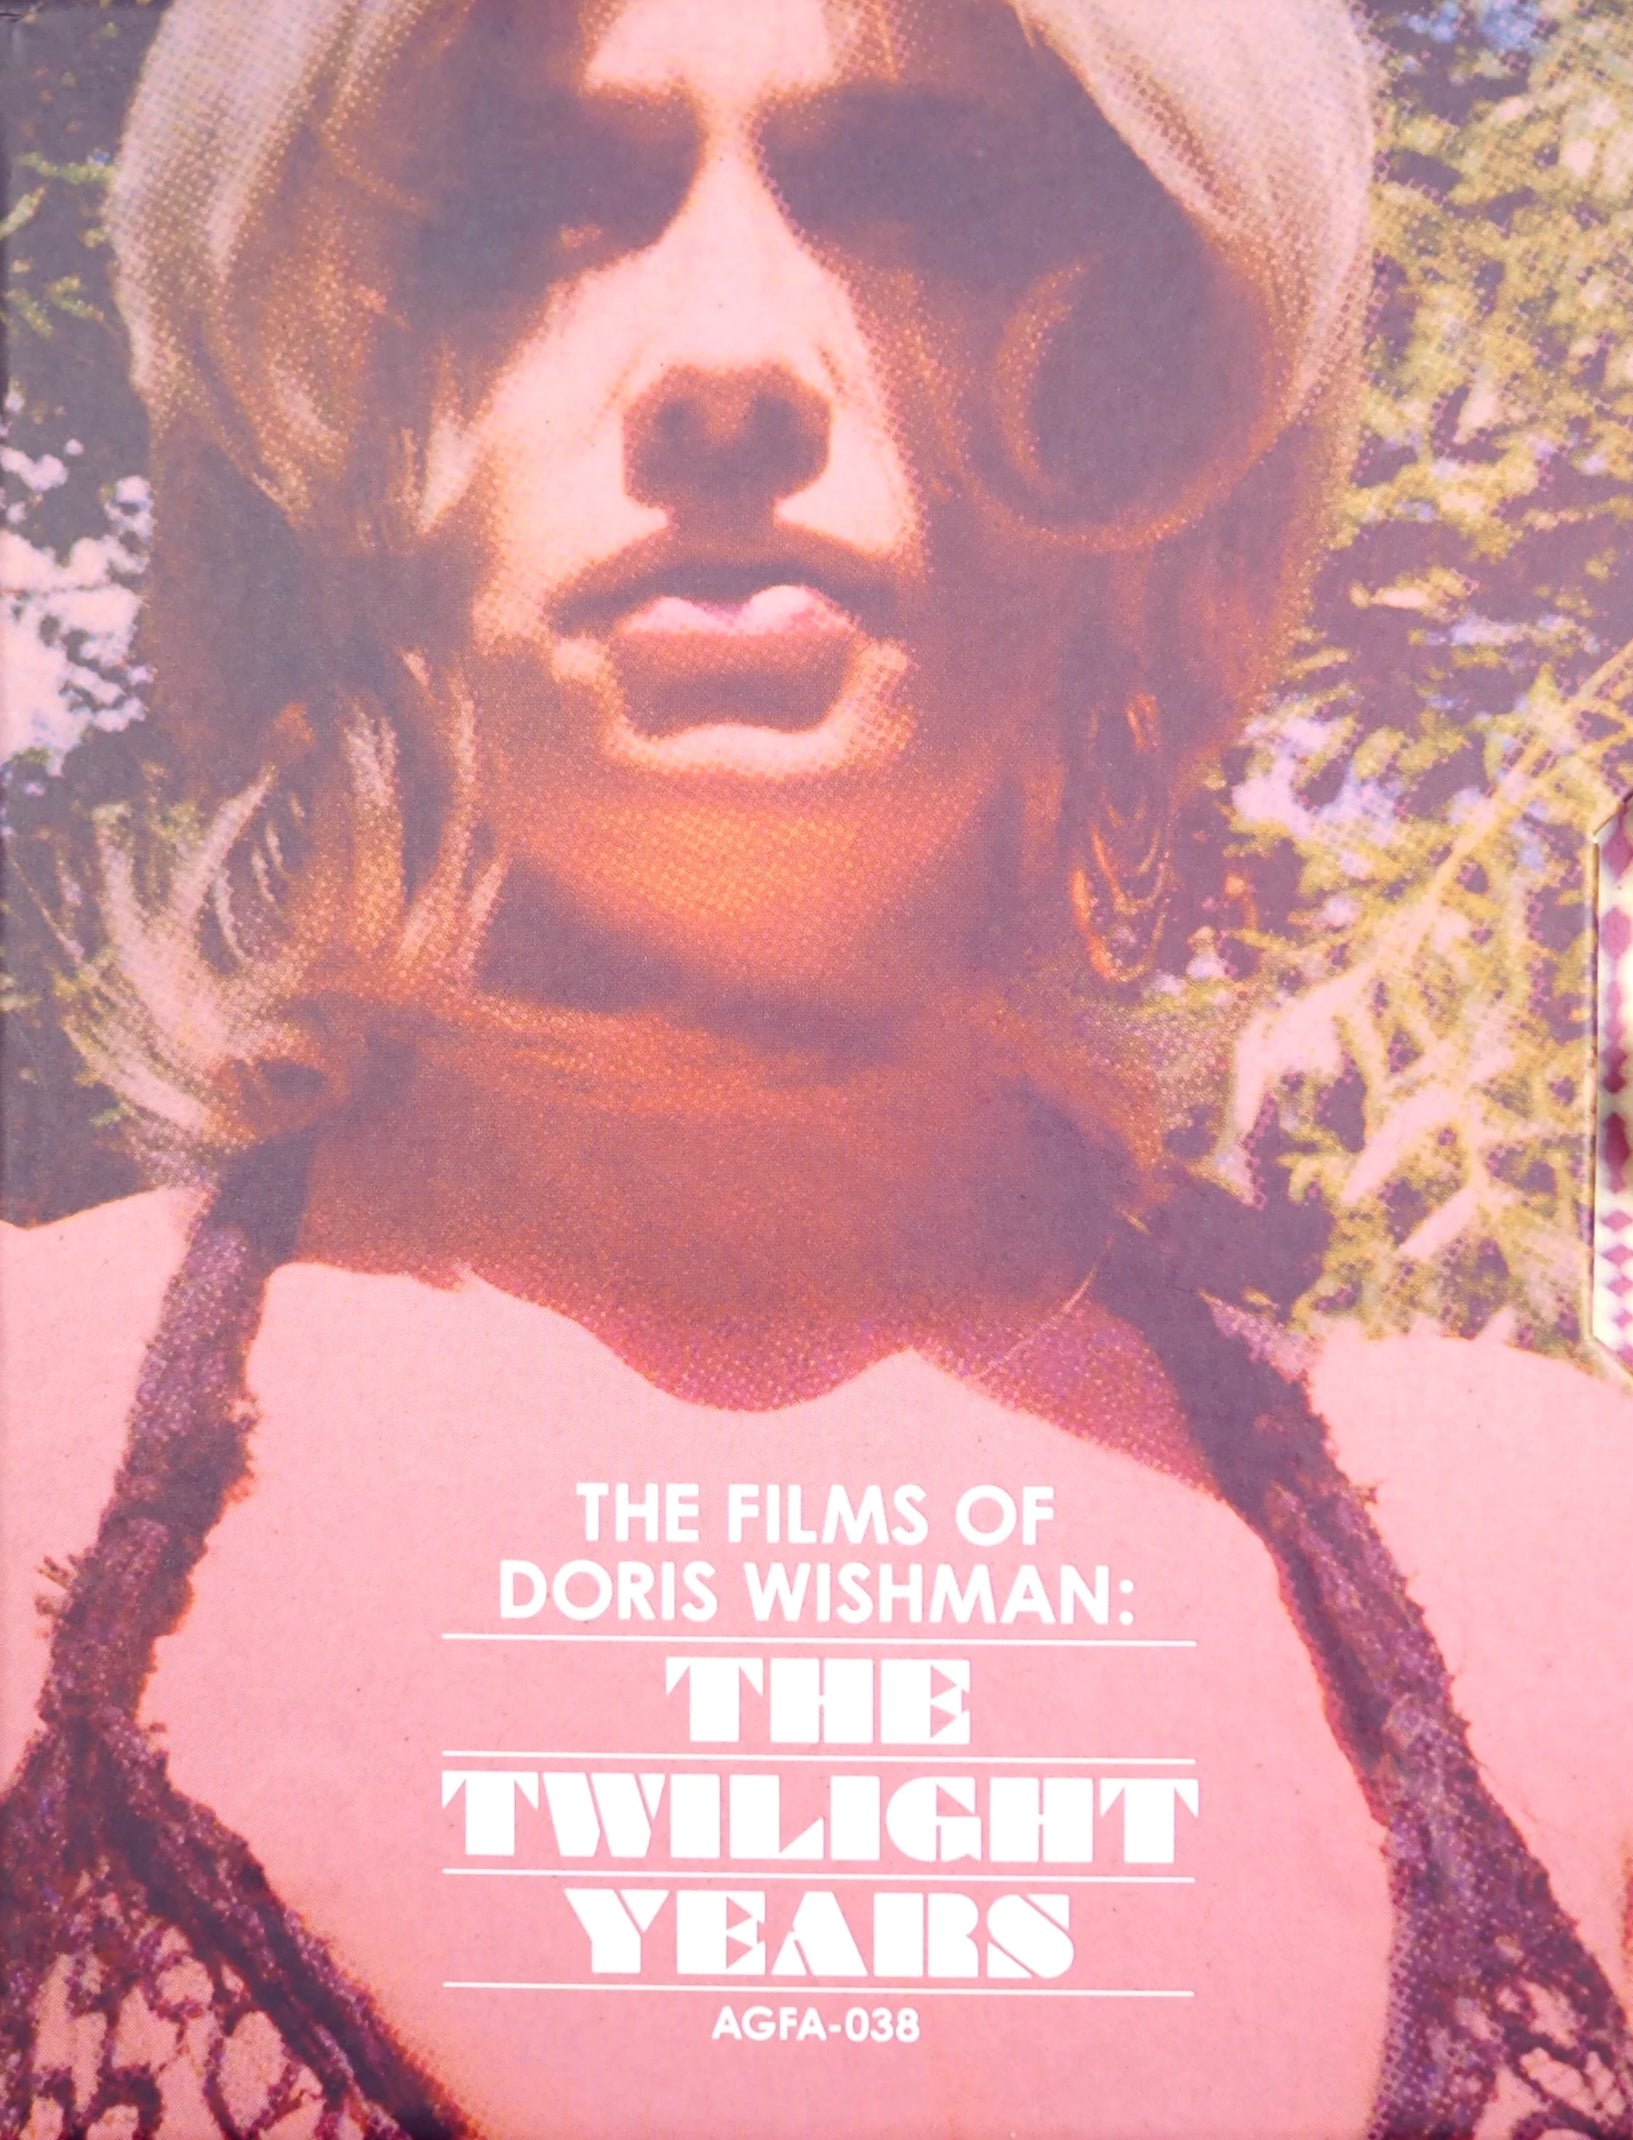 THE FILMS OF DORIS WISHMAN: THE TWILIGHT YEARS (LIMITED EDITION) BLU-RAY